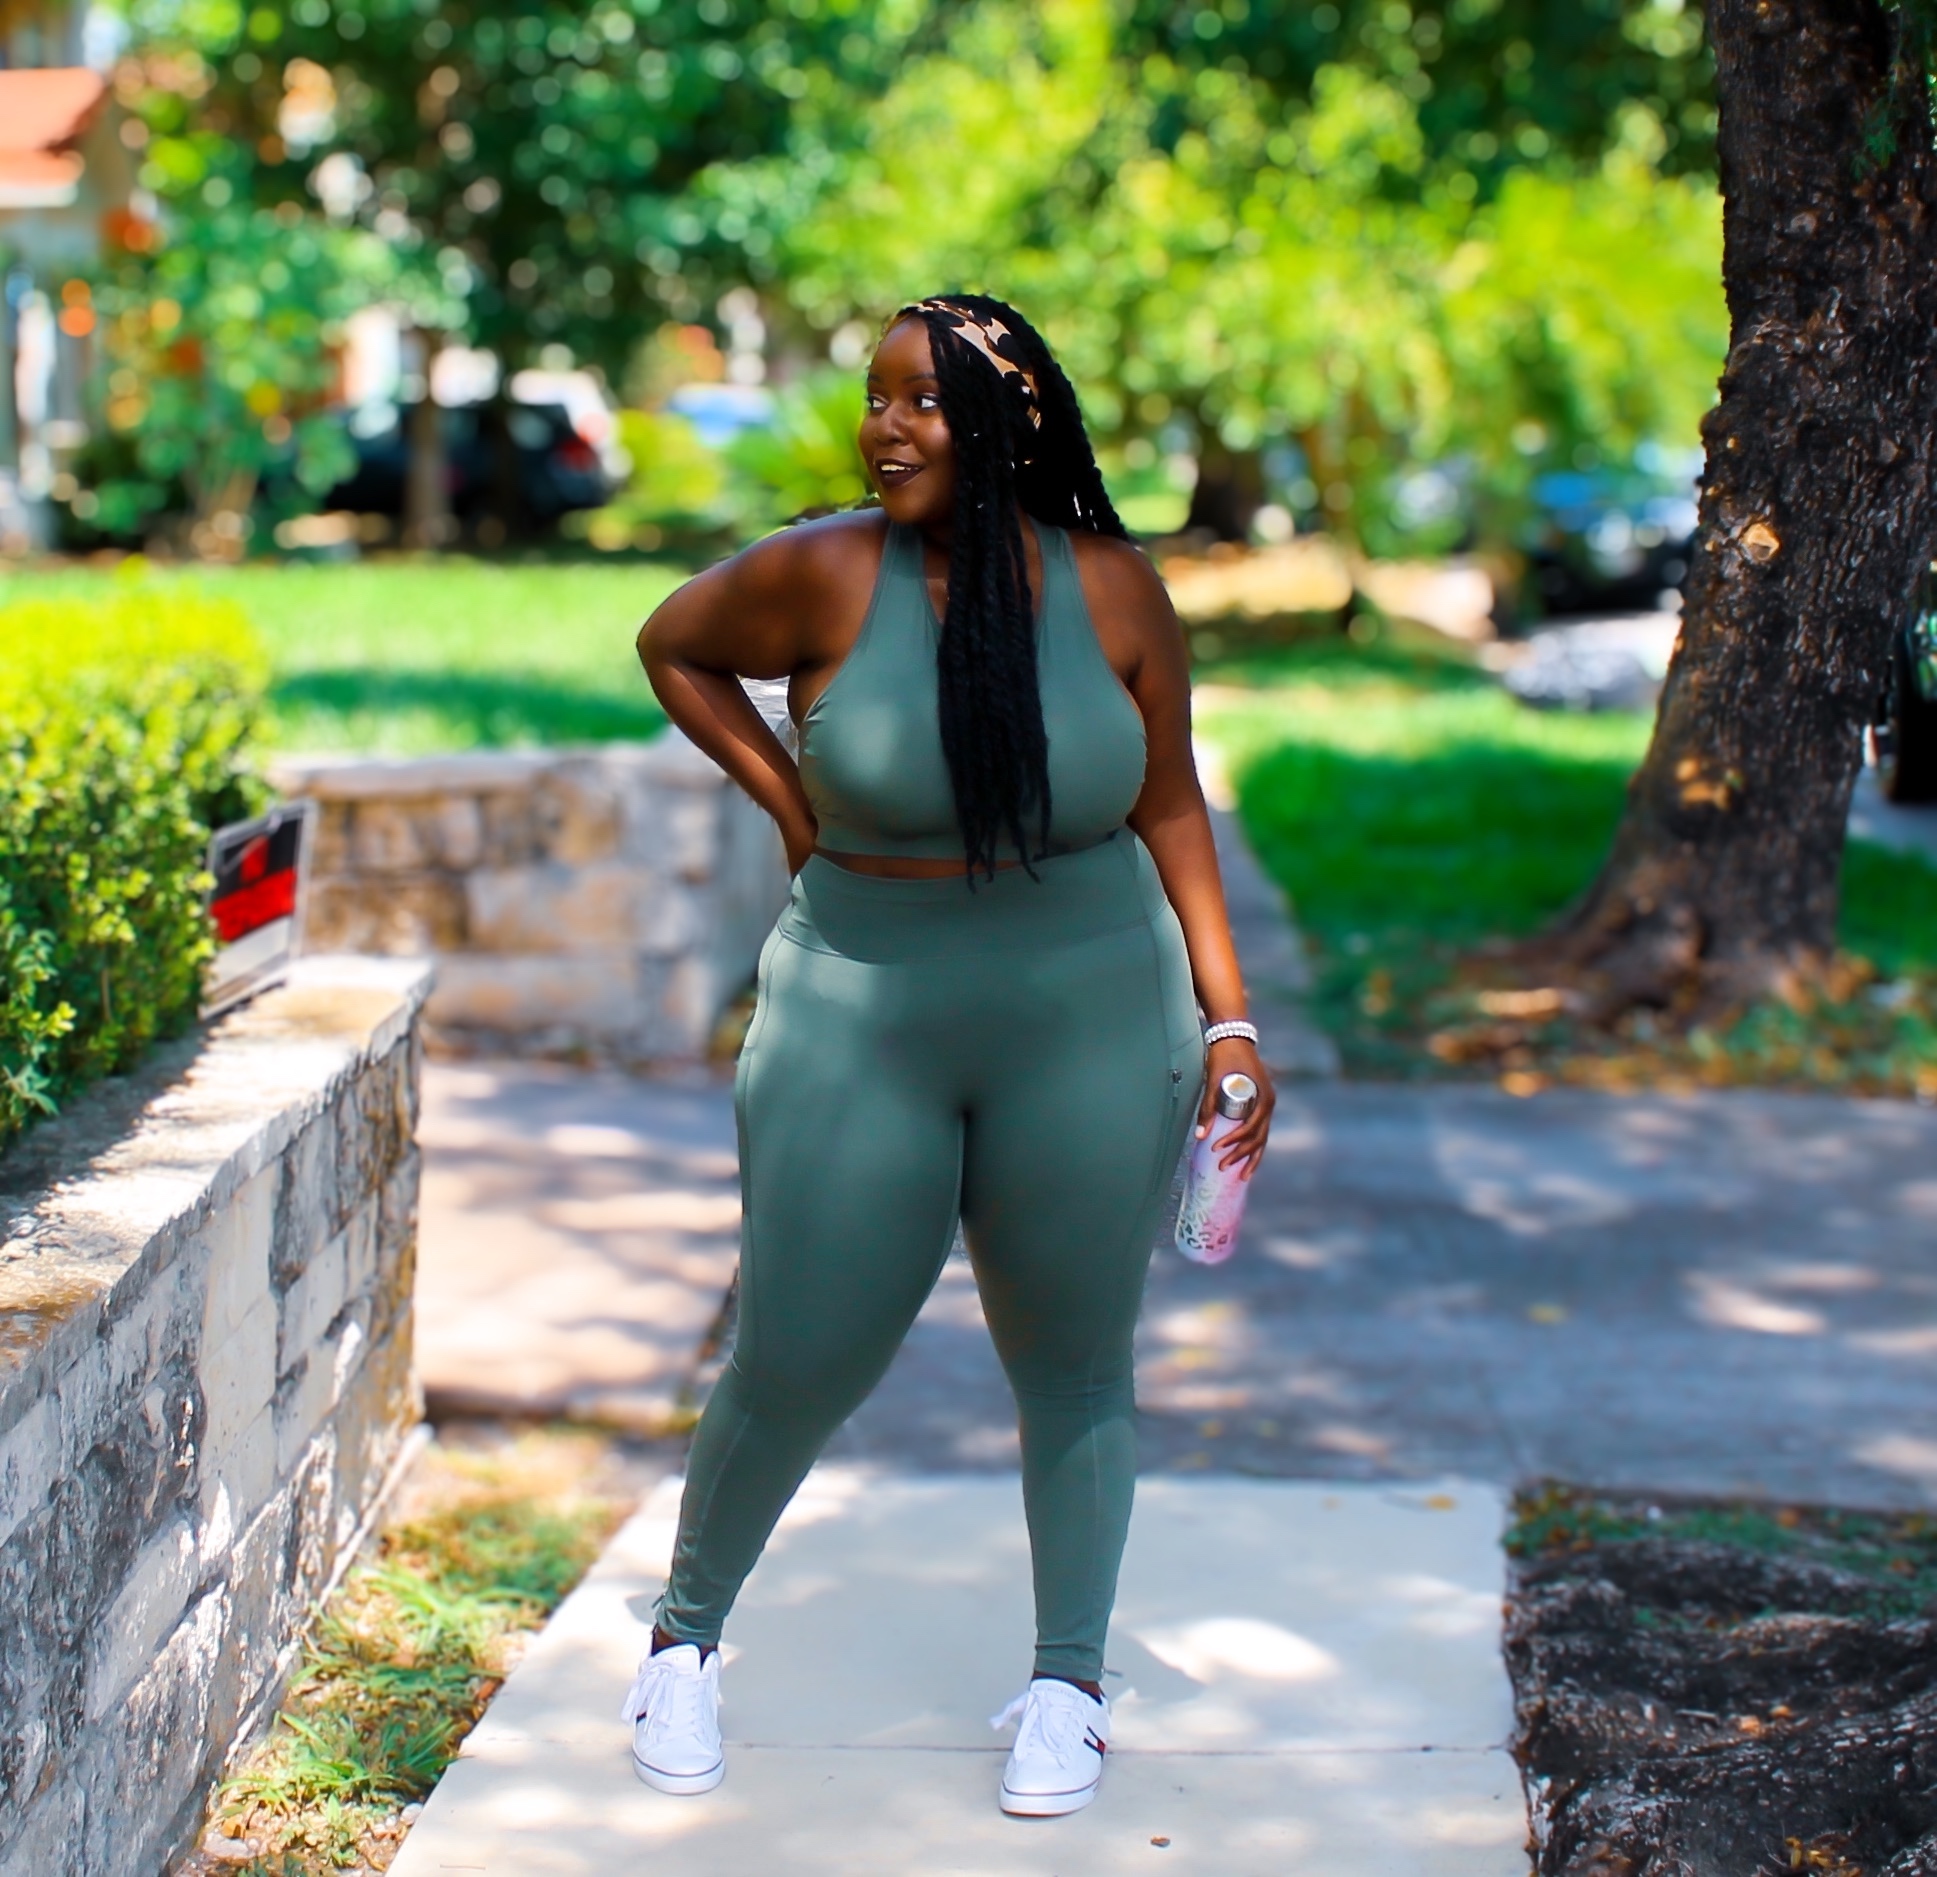 houston influencer, fabletics active, fabletics review plus size, move in fabletics, athleisure nike puma plus size fashion blogs 2019, beautiful curvy girls, beautiful plus size dark skin girls, plus size black bloggers, clothes for curvy girls, curvy girl fashion clothing, plus blog, plus size fashion tips, plus size women blog, curvy women fashion, plus blog, curvy girl fashion blog, style plus curves, plus size fashion instagram, curvy girl blog, bbw blog, plus size street fashion, plus size beauty blog, plus size fashion ideas, curvy girl summer outfits, plus size fashion magazine, plus fashion bloggers, zara